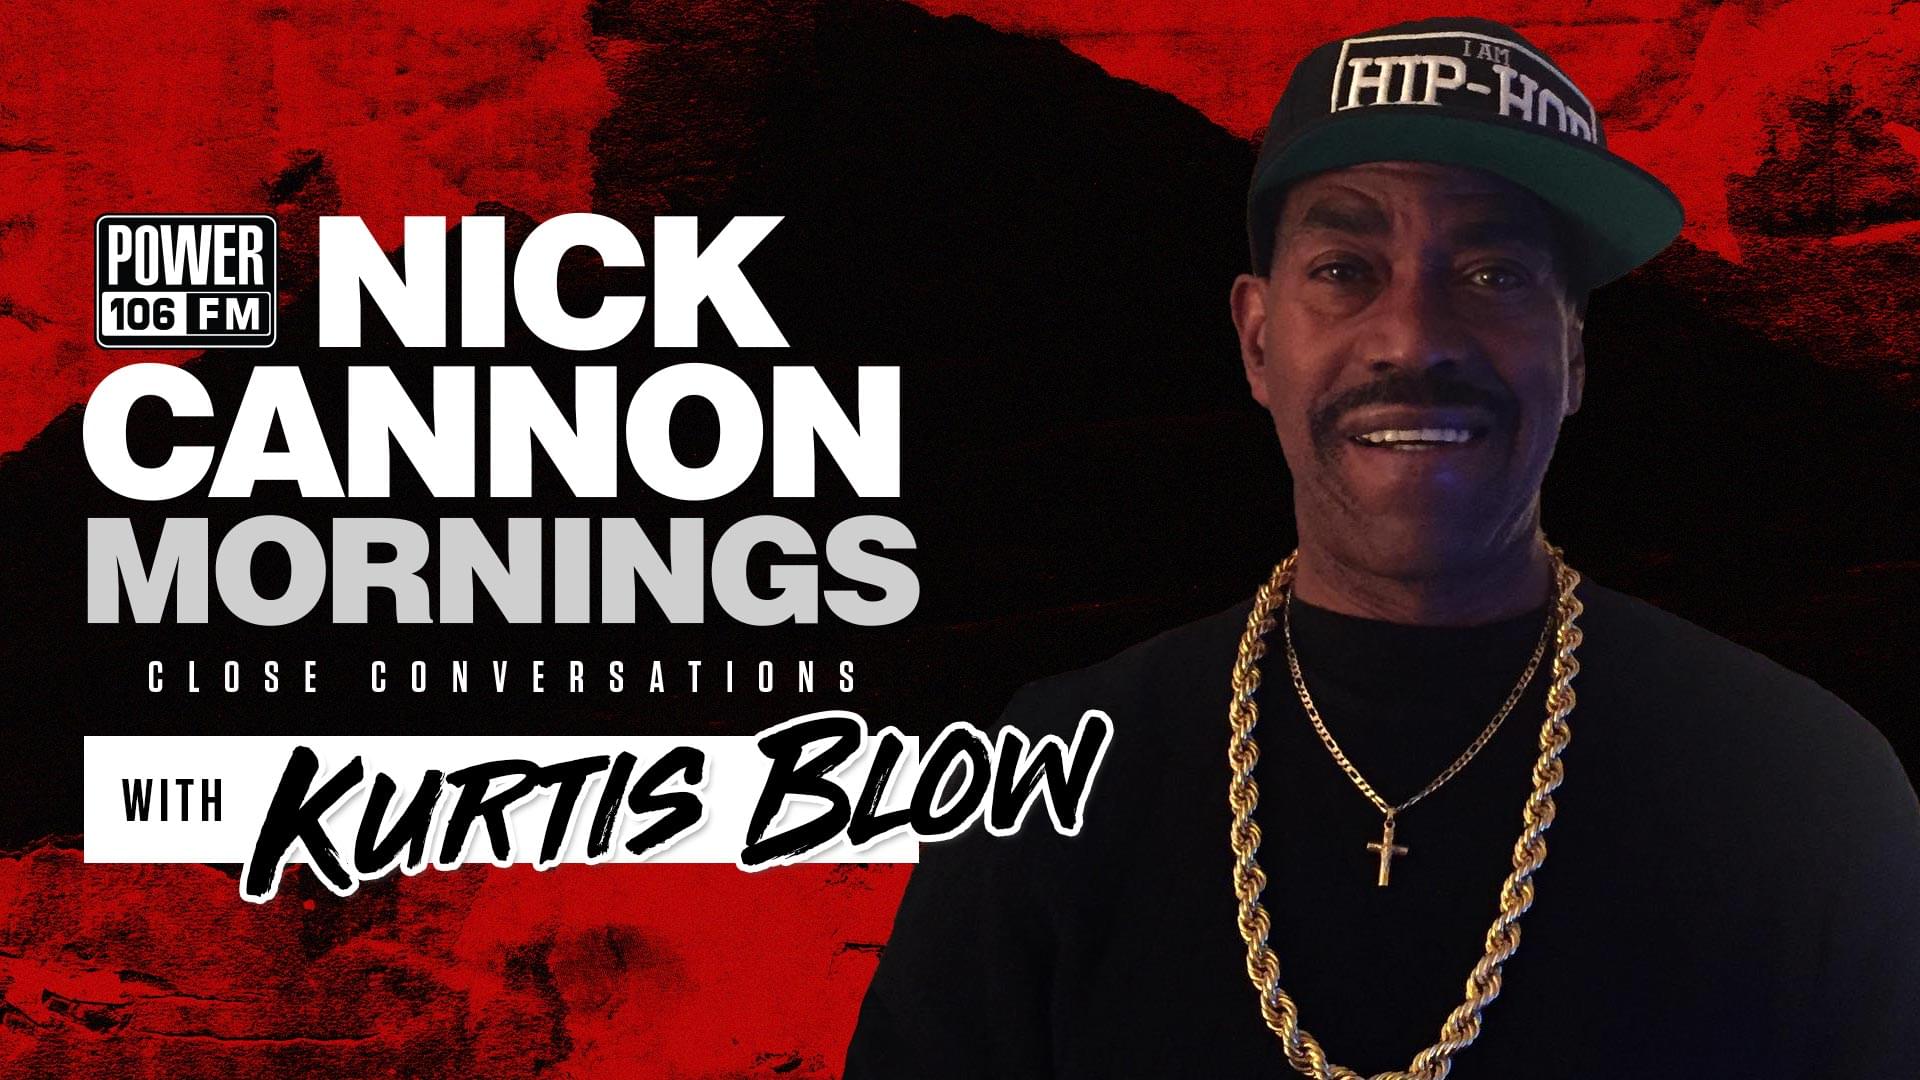 Kurtis Blow on Being A Hip-Hop Pioneer, New Artists Paying A Hip Hop Tax + “The Breaks” Celebrating 40 Years